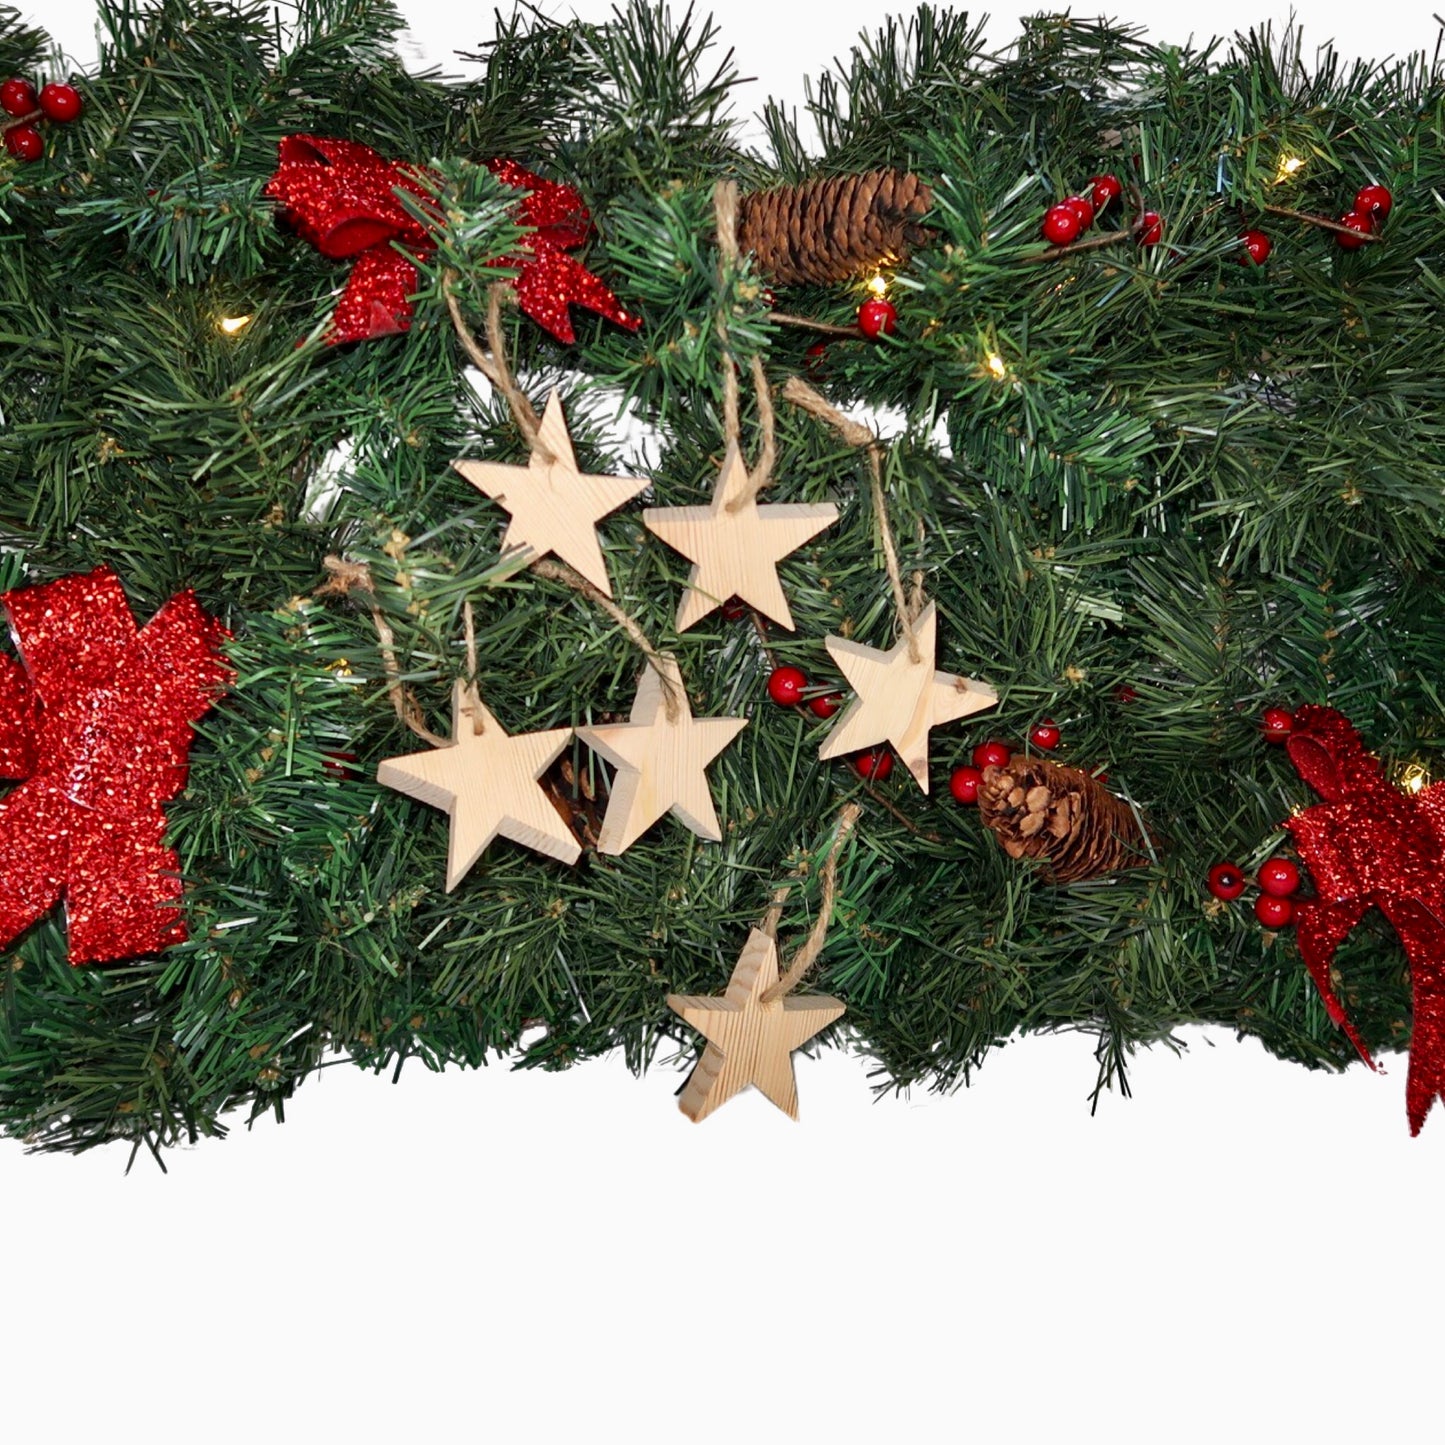 Star Hanging Tree Decorations - Small Chunky - Set of 6